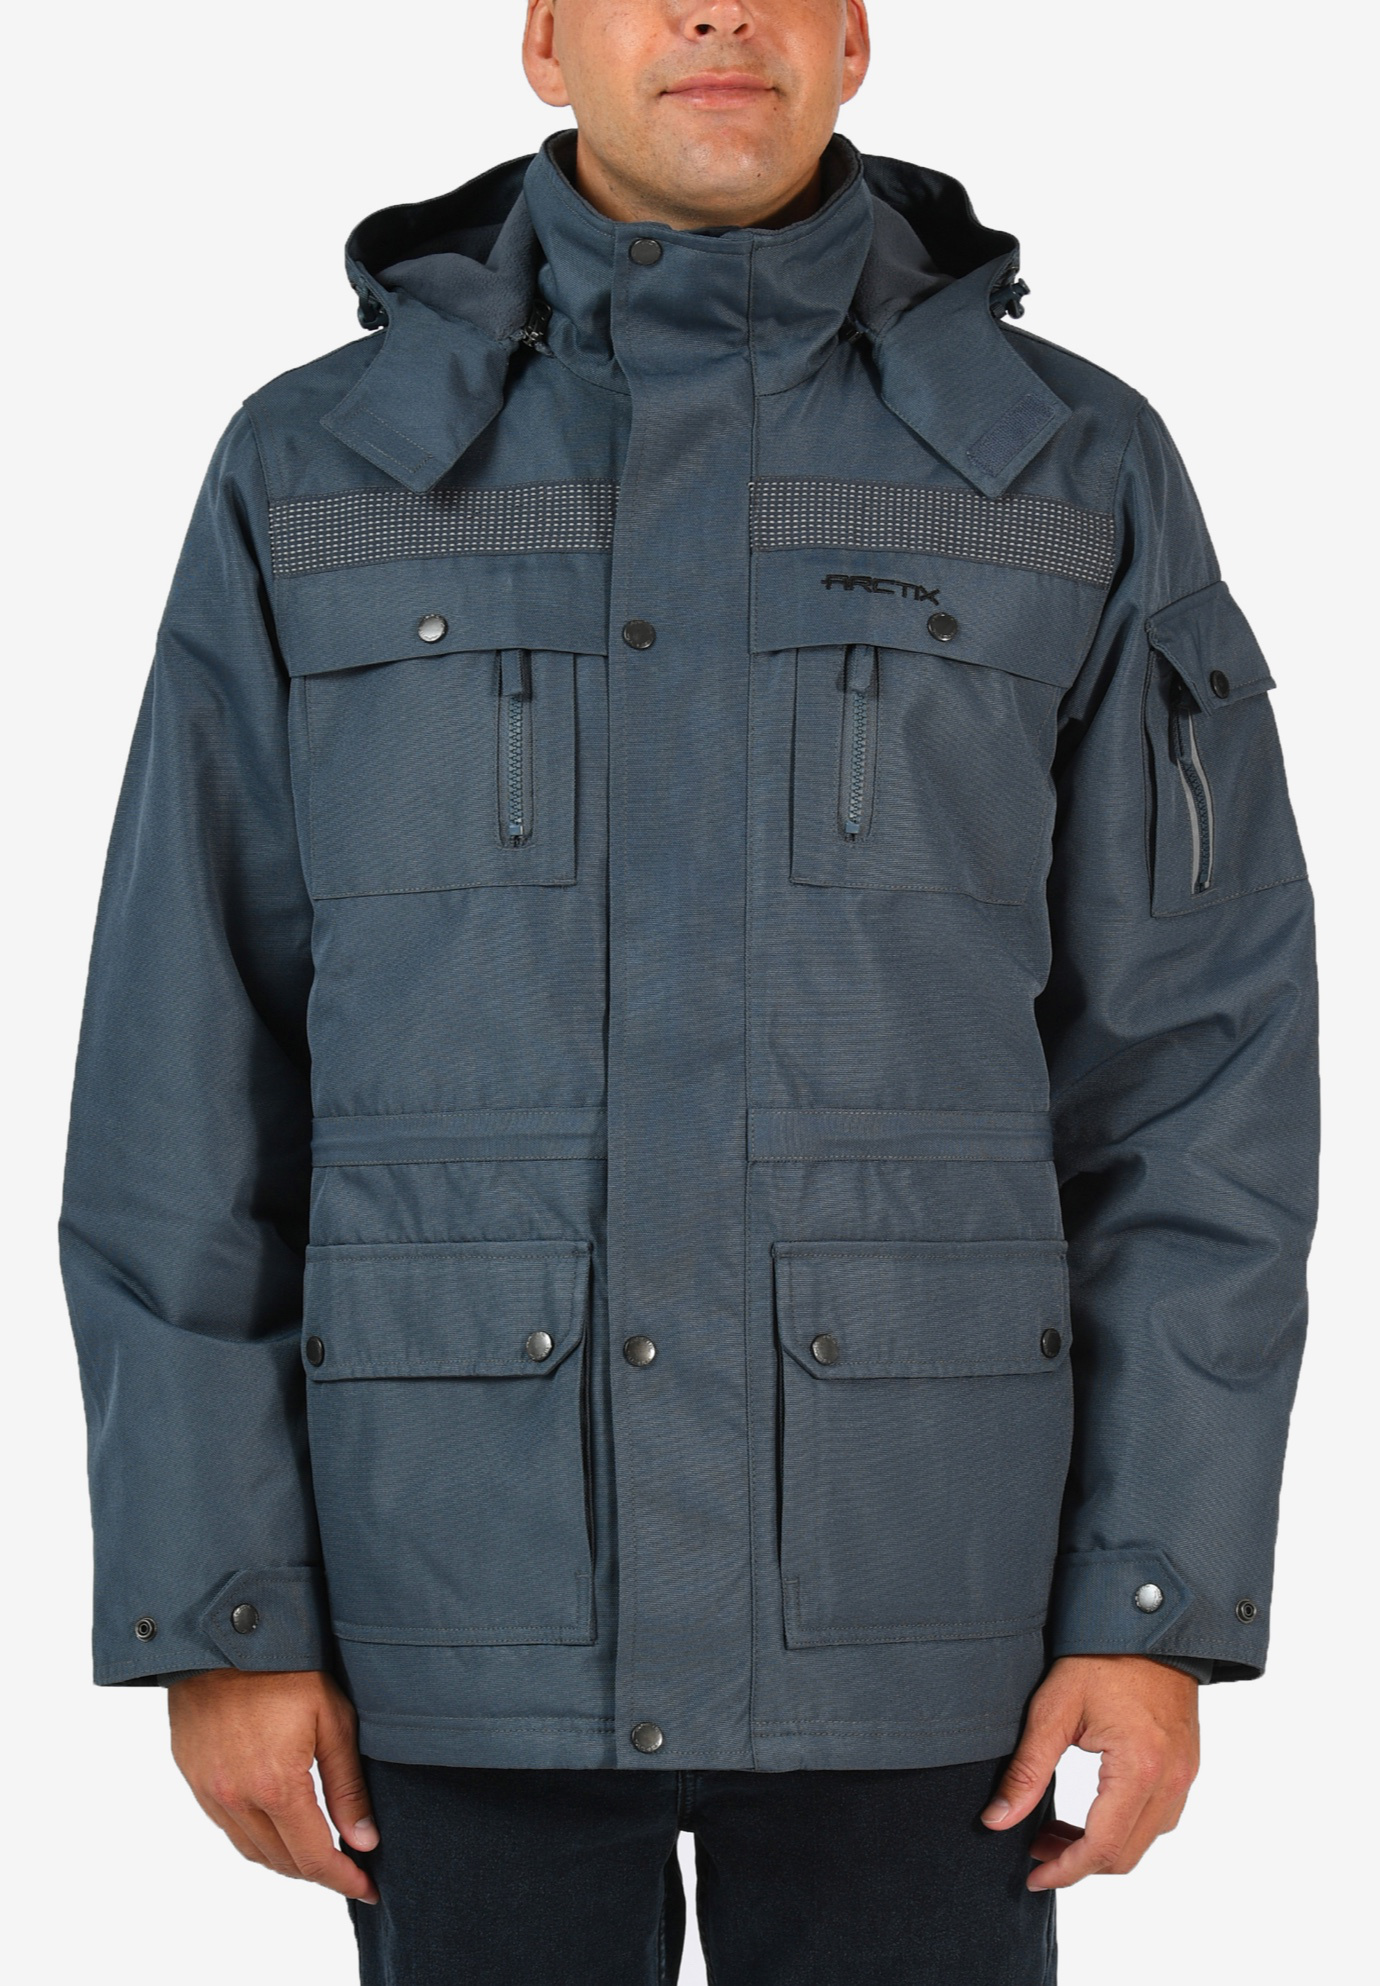 Tundra Insulated Performance Parka by Arctix | King Size